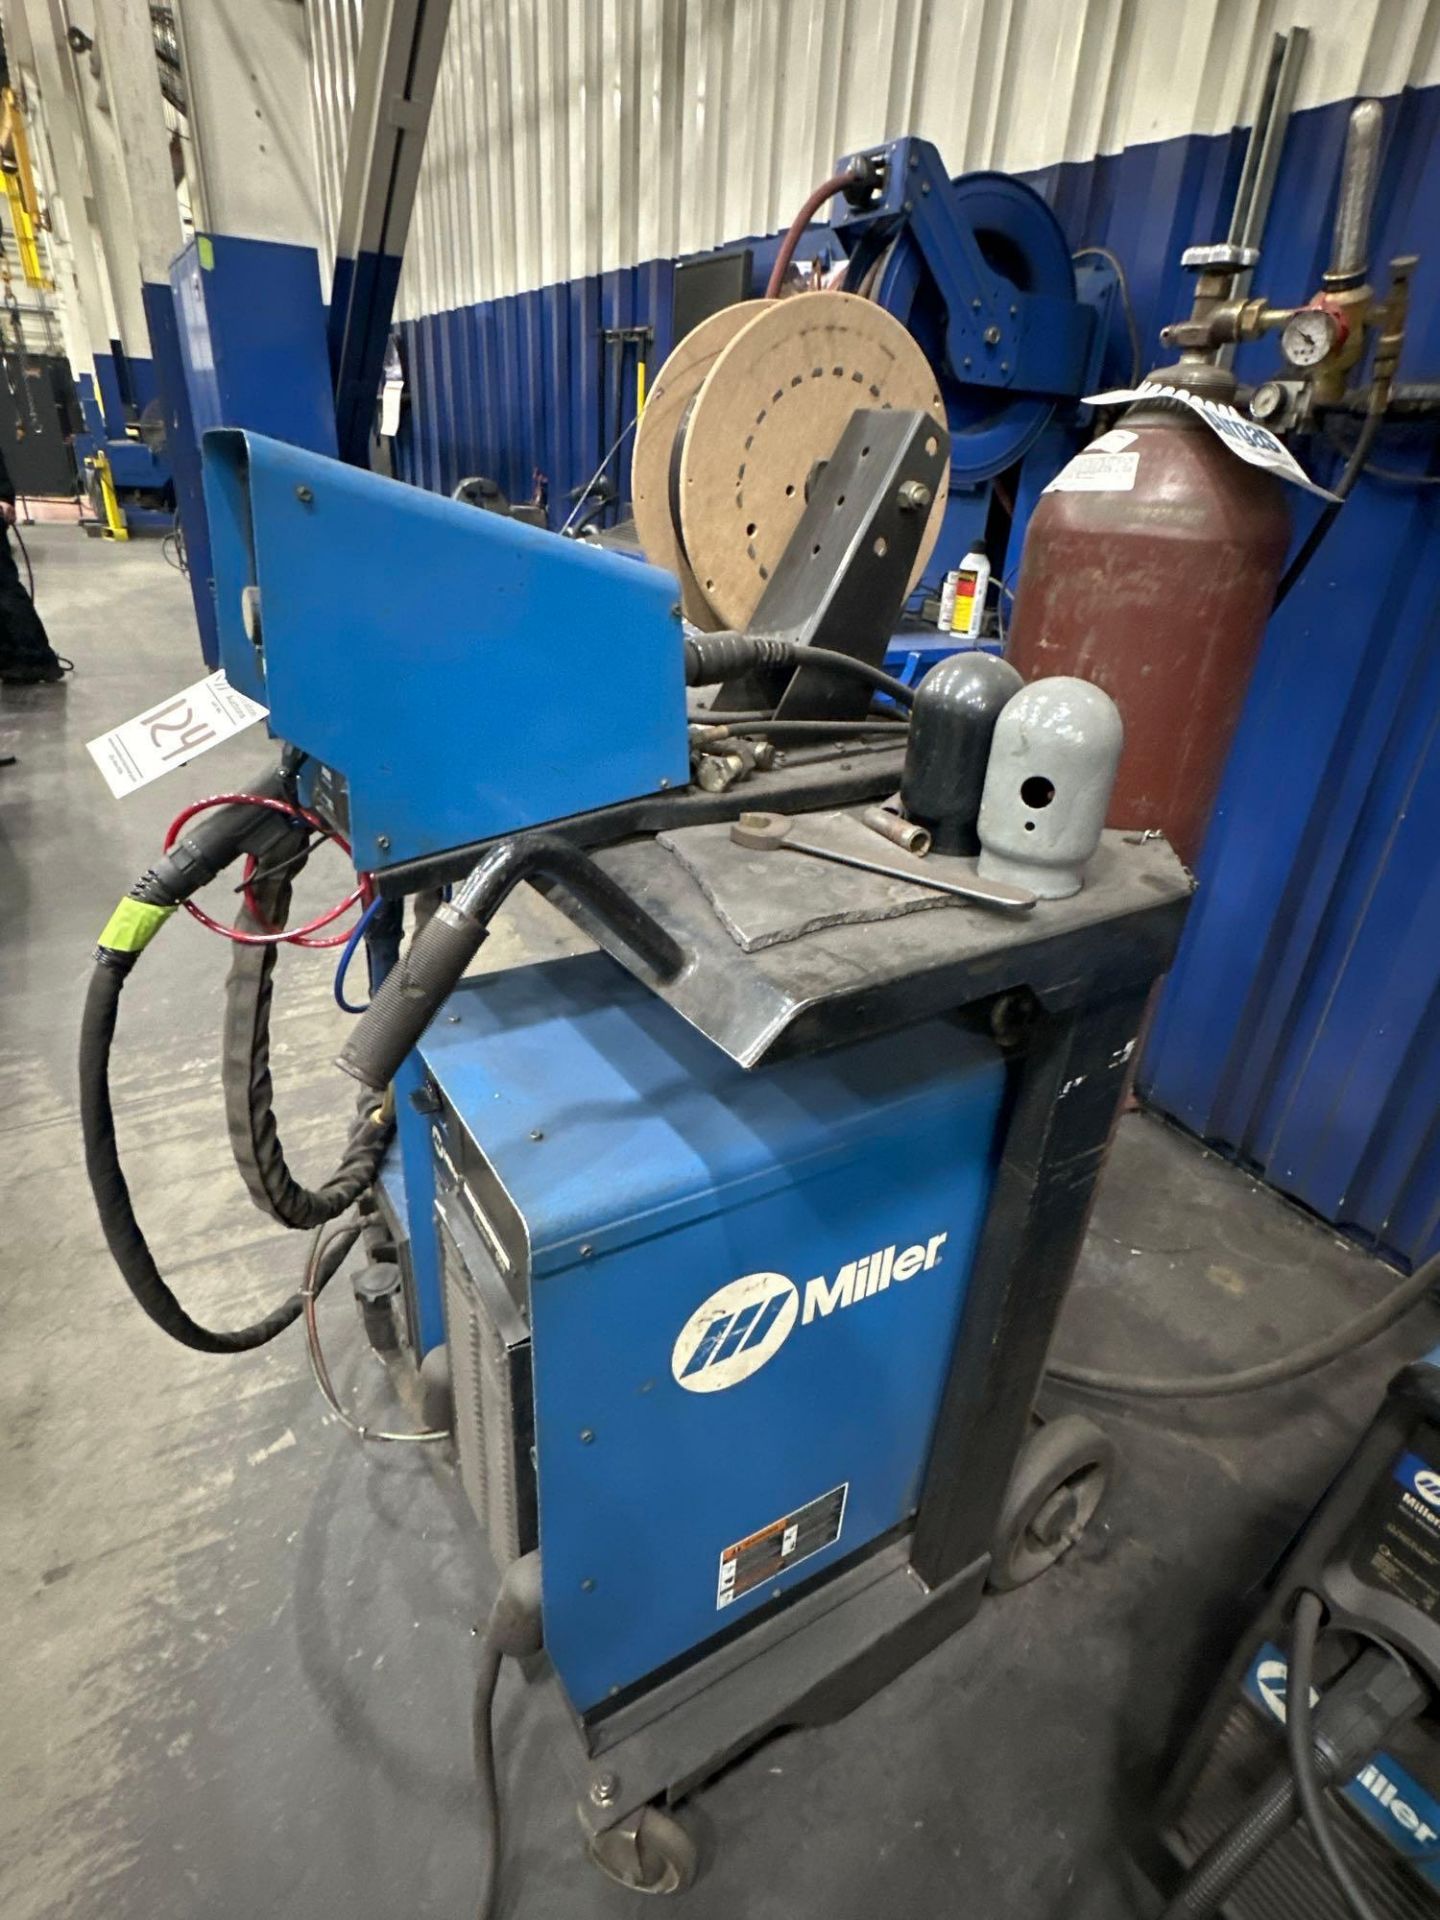 MILLER AXCESS 450 WIRE WELDER WITH AXCESS 40V WIRE FEEDER AND COOLMATE 3